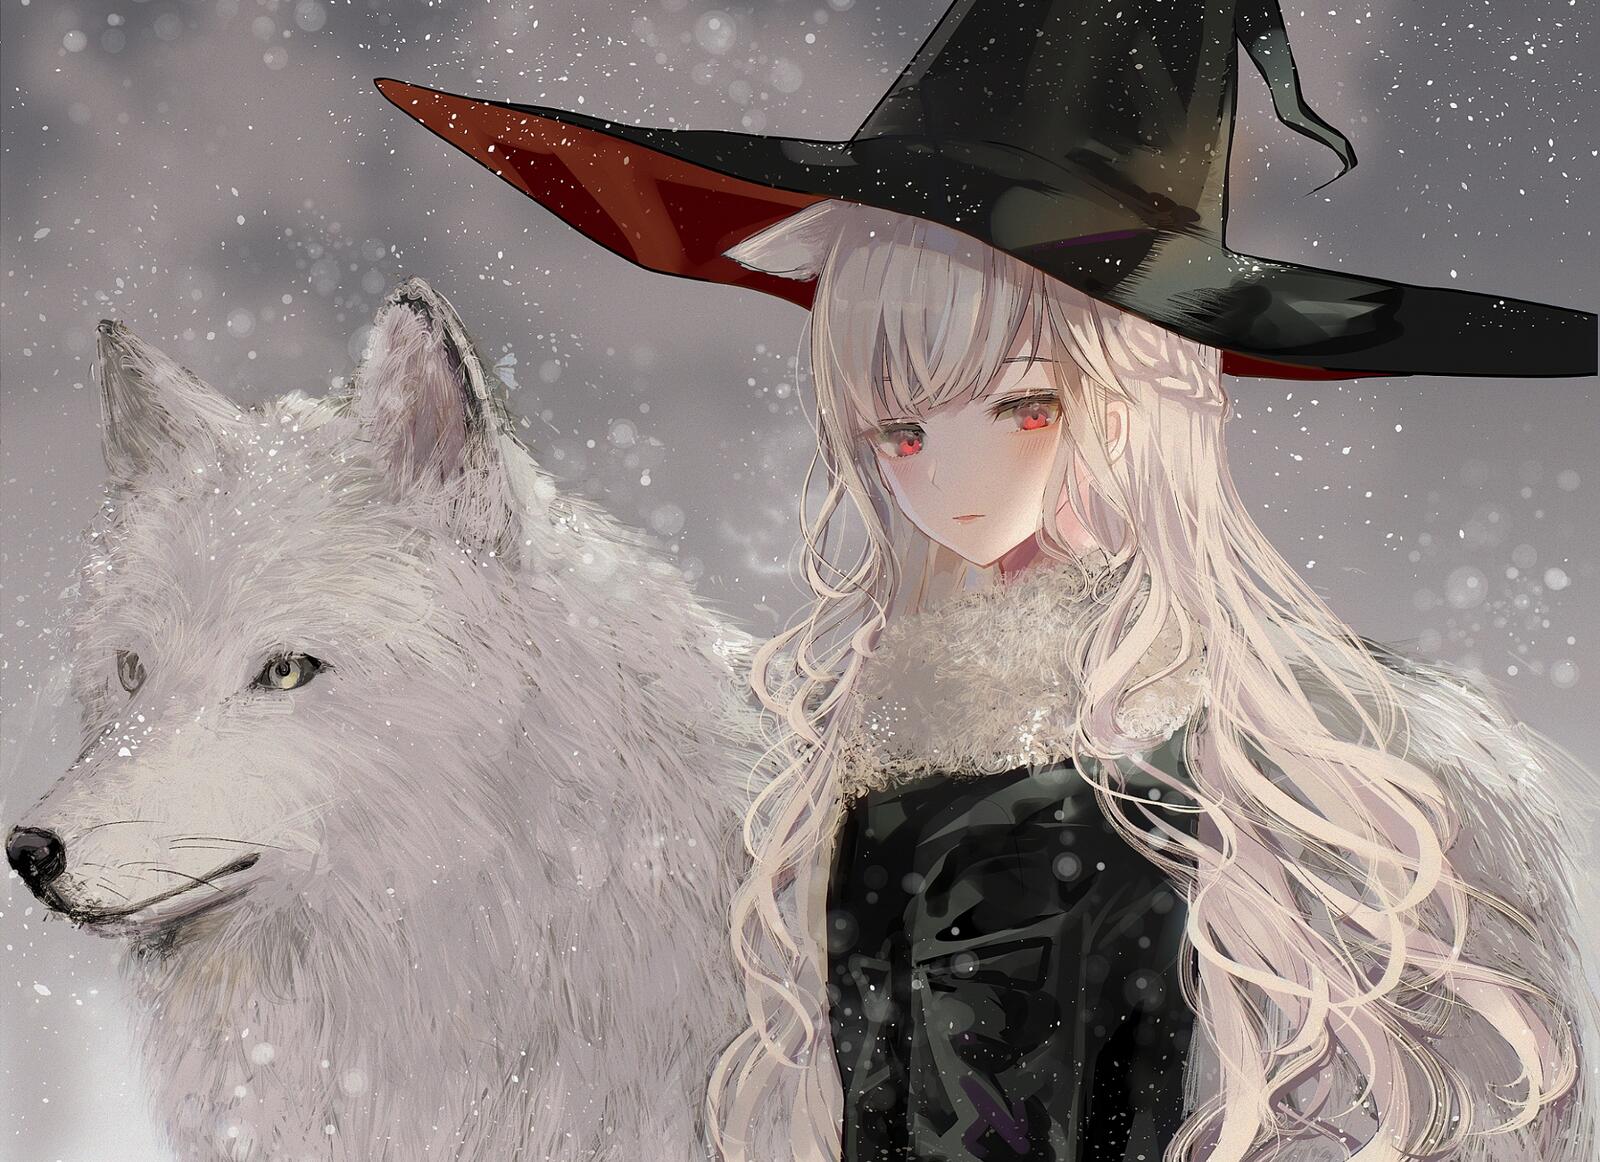 Wallpapers wallpaper anime witch girl snow white wolf on the desktop